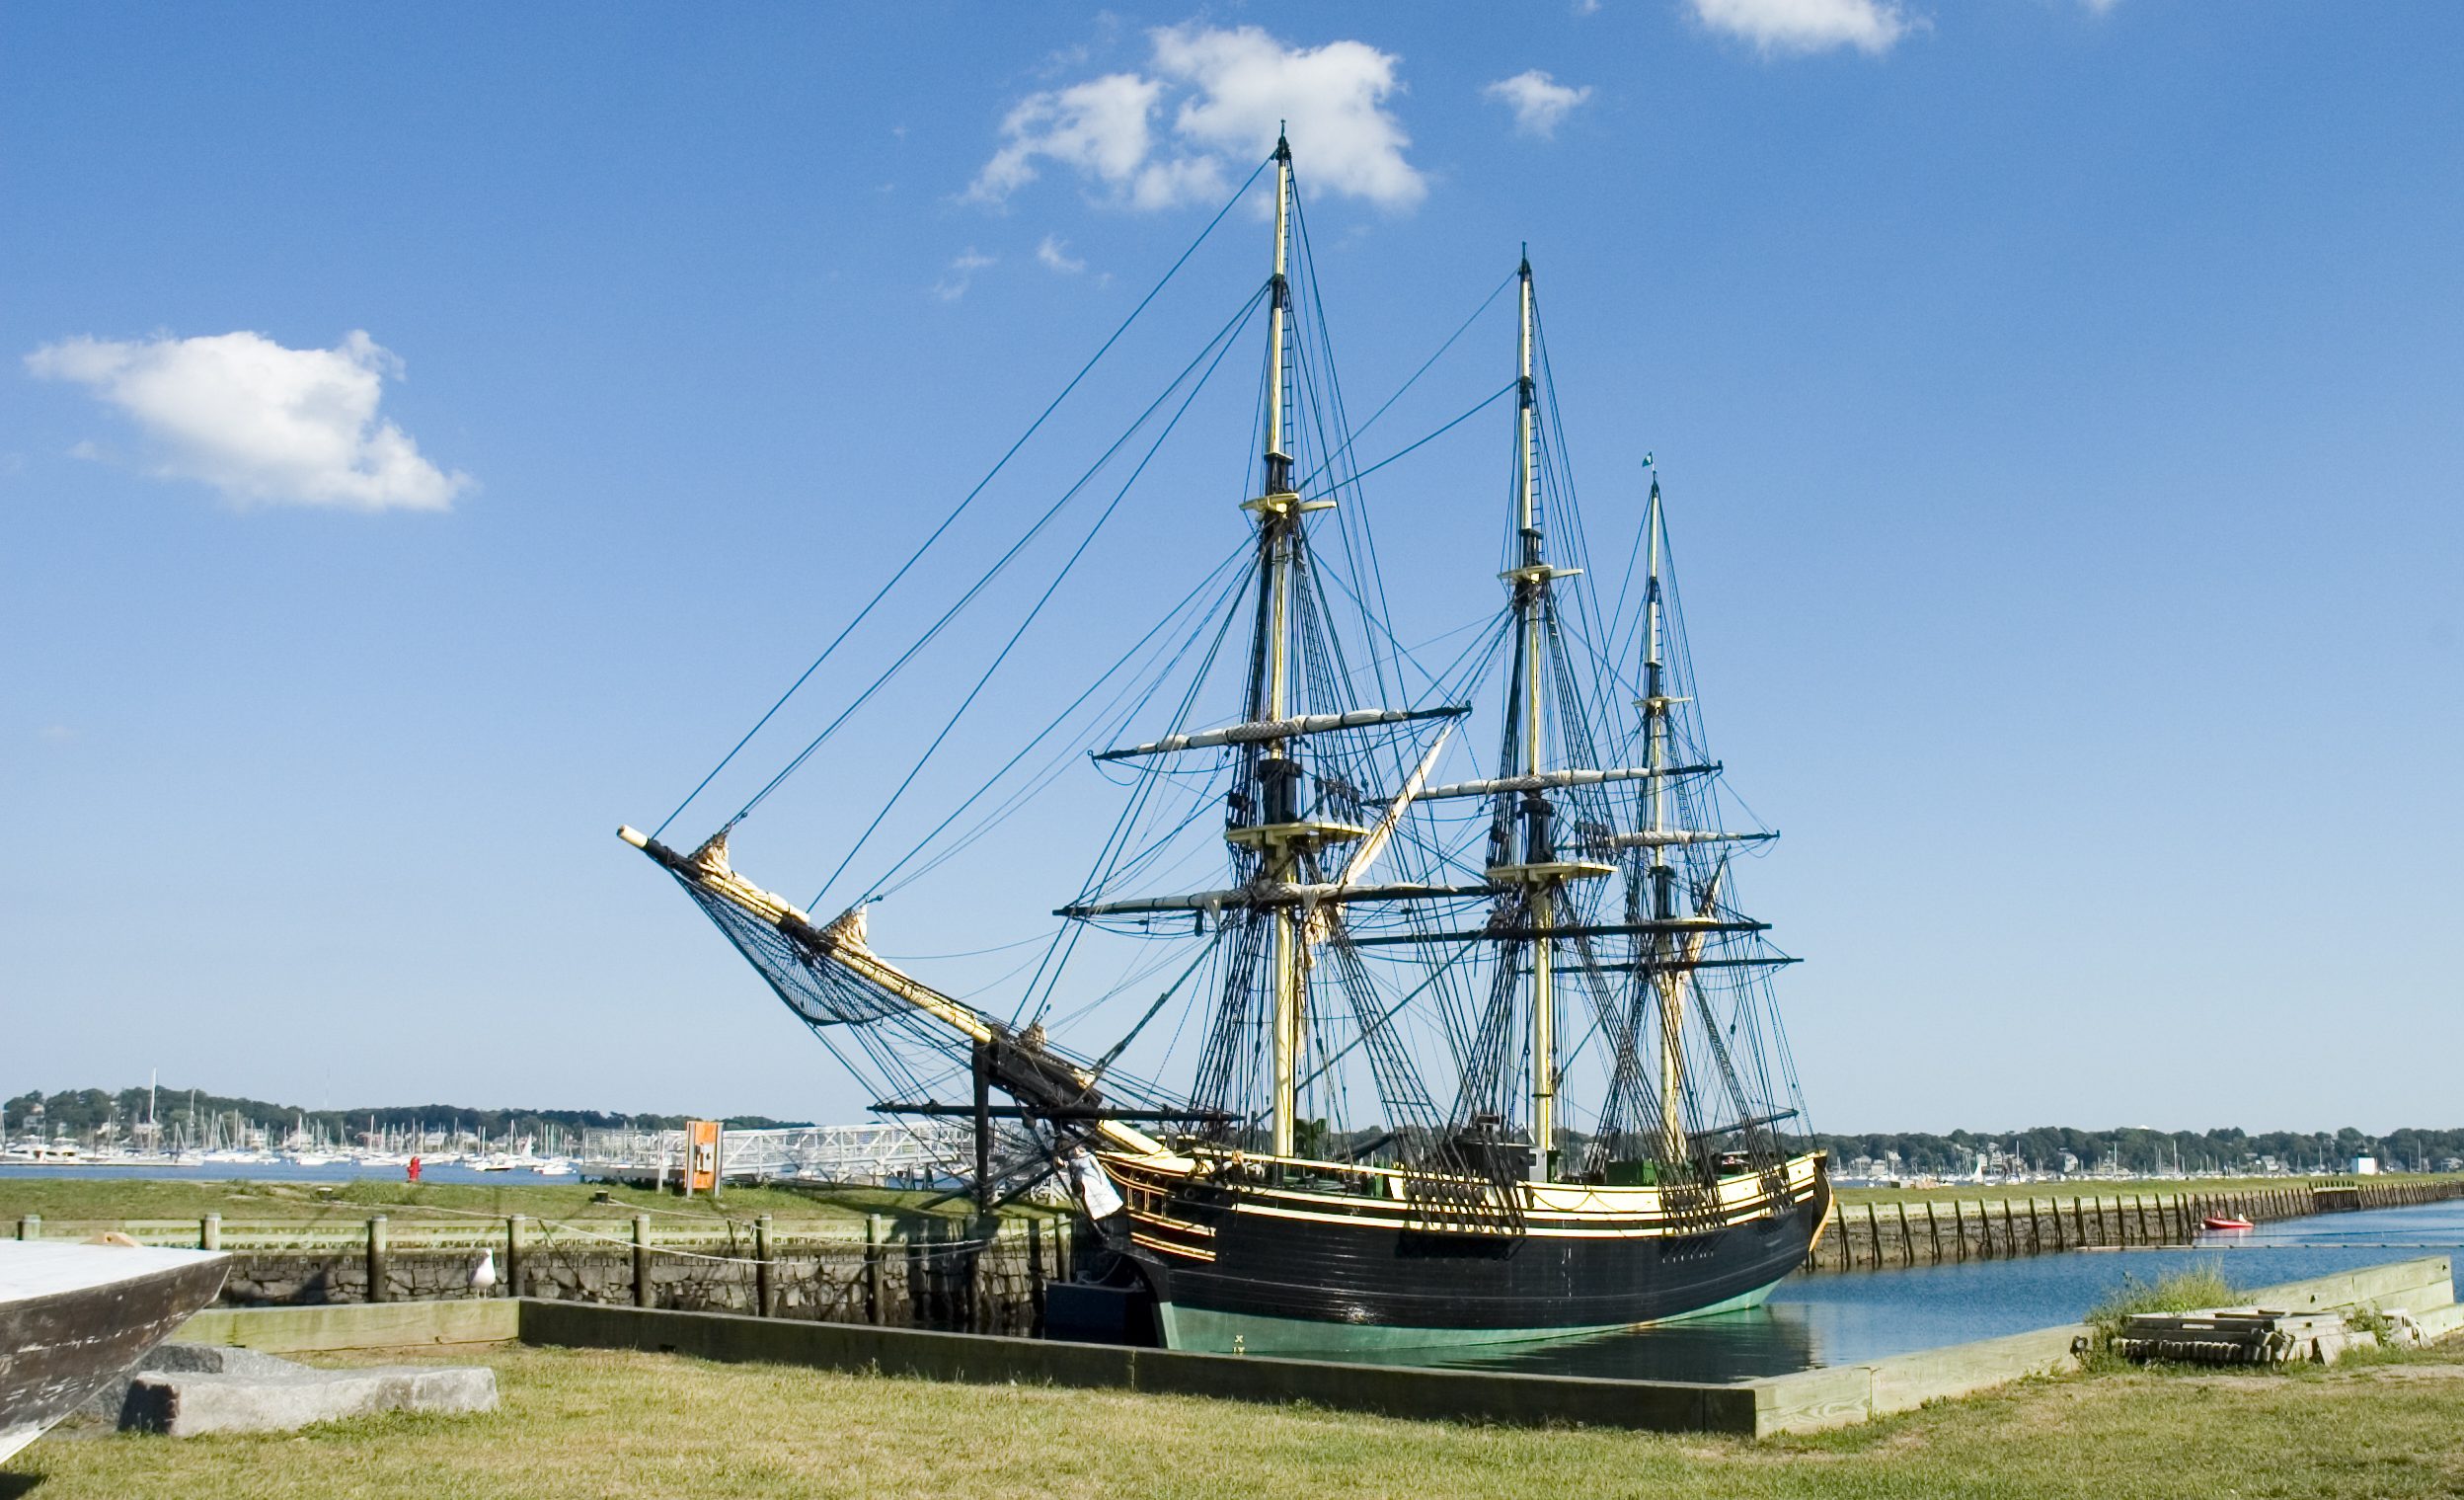 Three-masted 18th-century ship moored in a slim harbor.